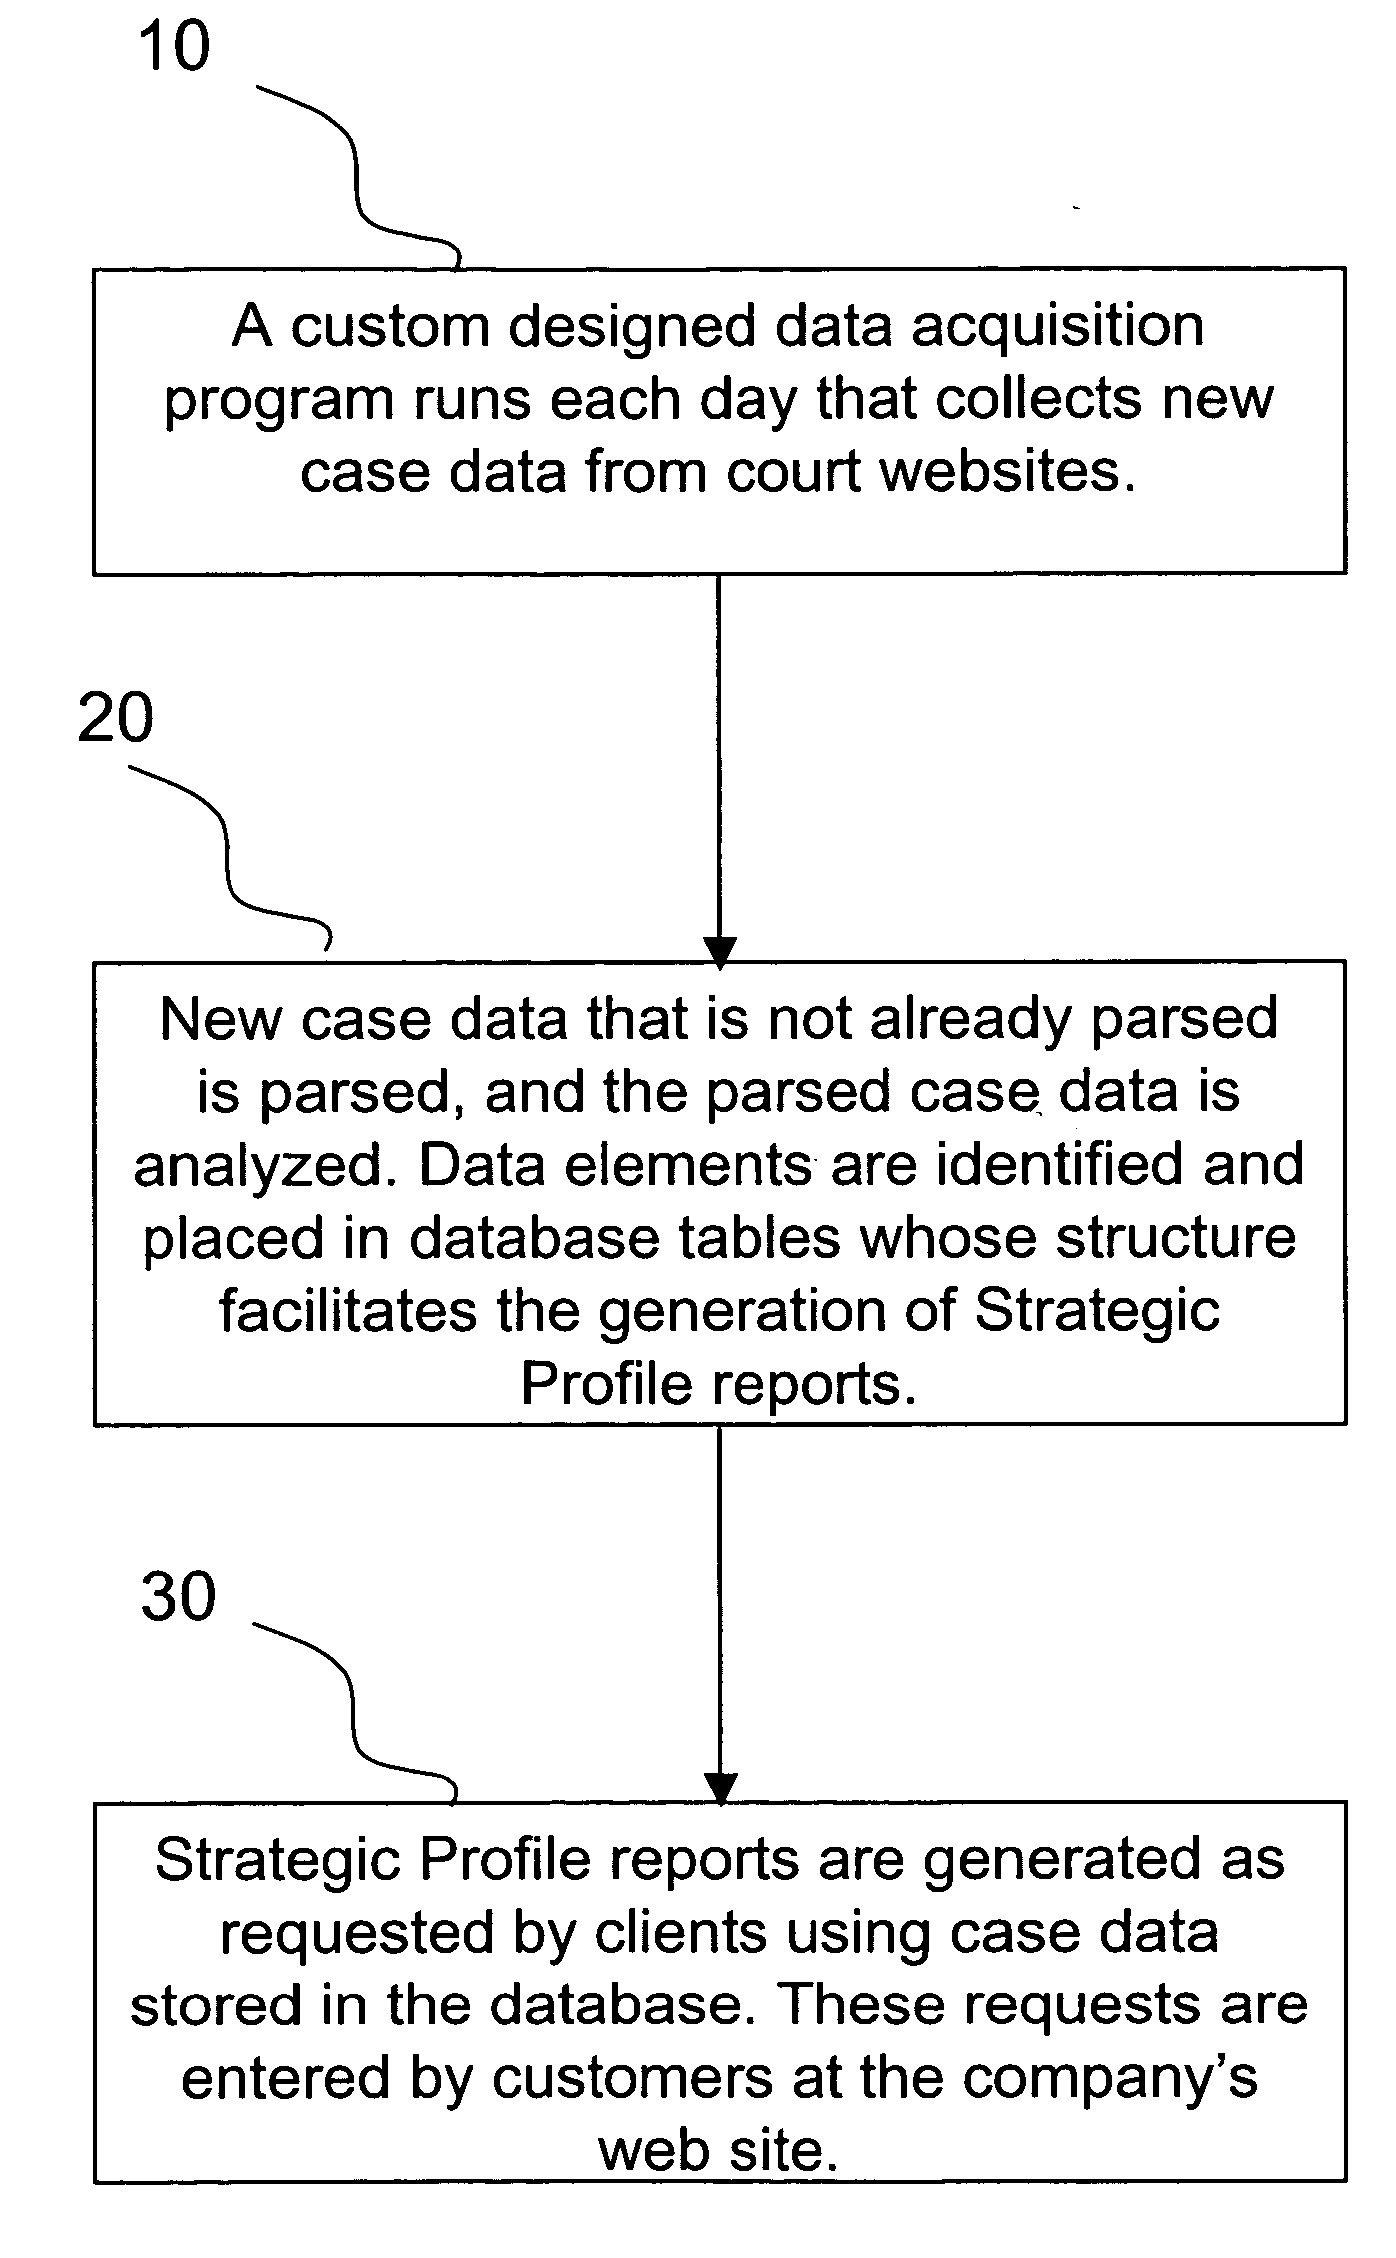 Computerized system and method for creating aggregate profile reports regarding litigants, attorneys, law firms, judges, and cases by type and by court from court docket records